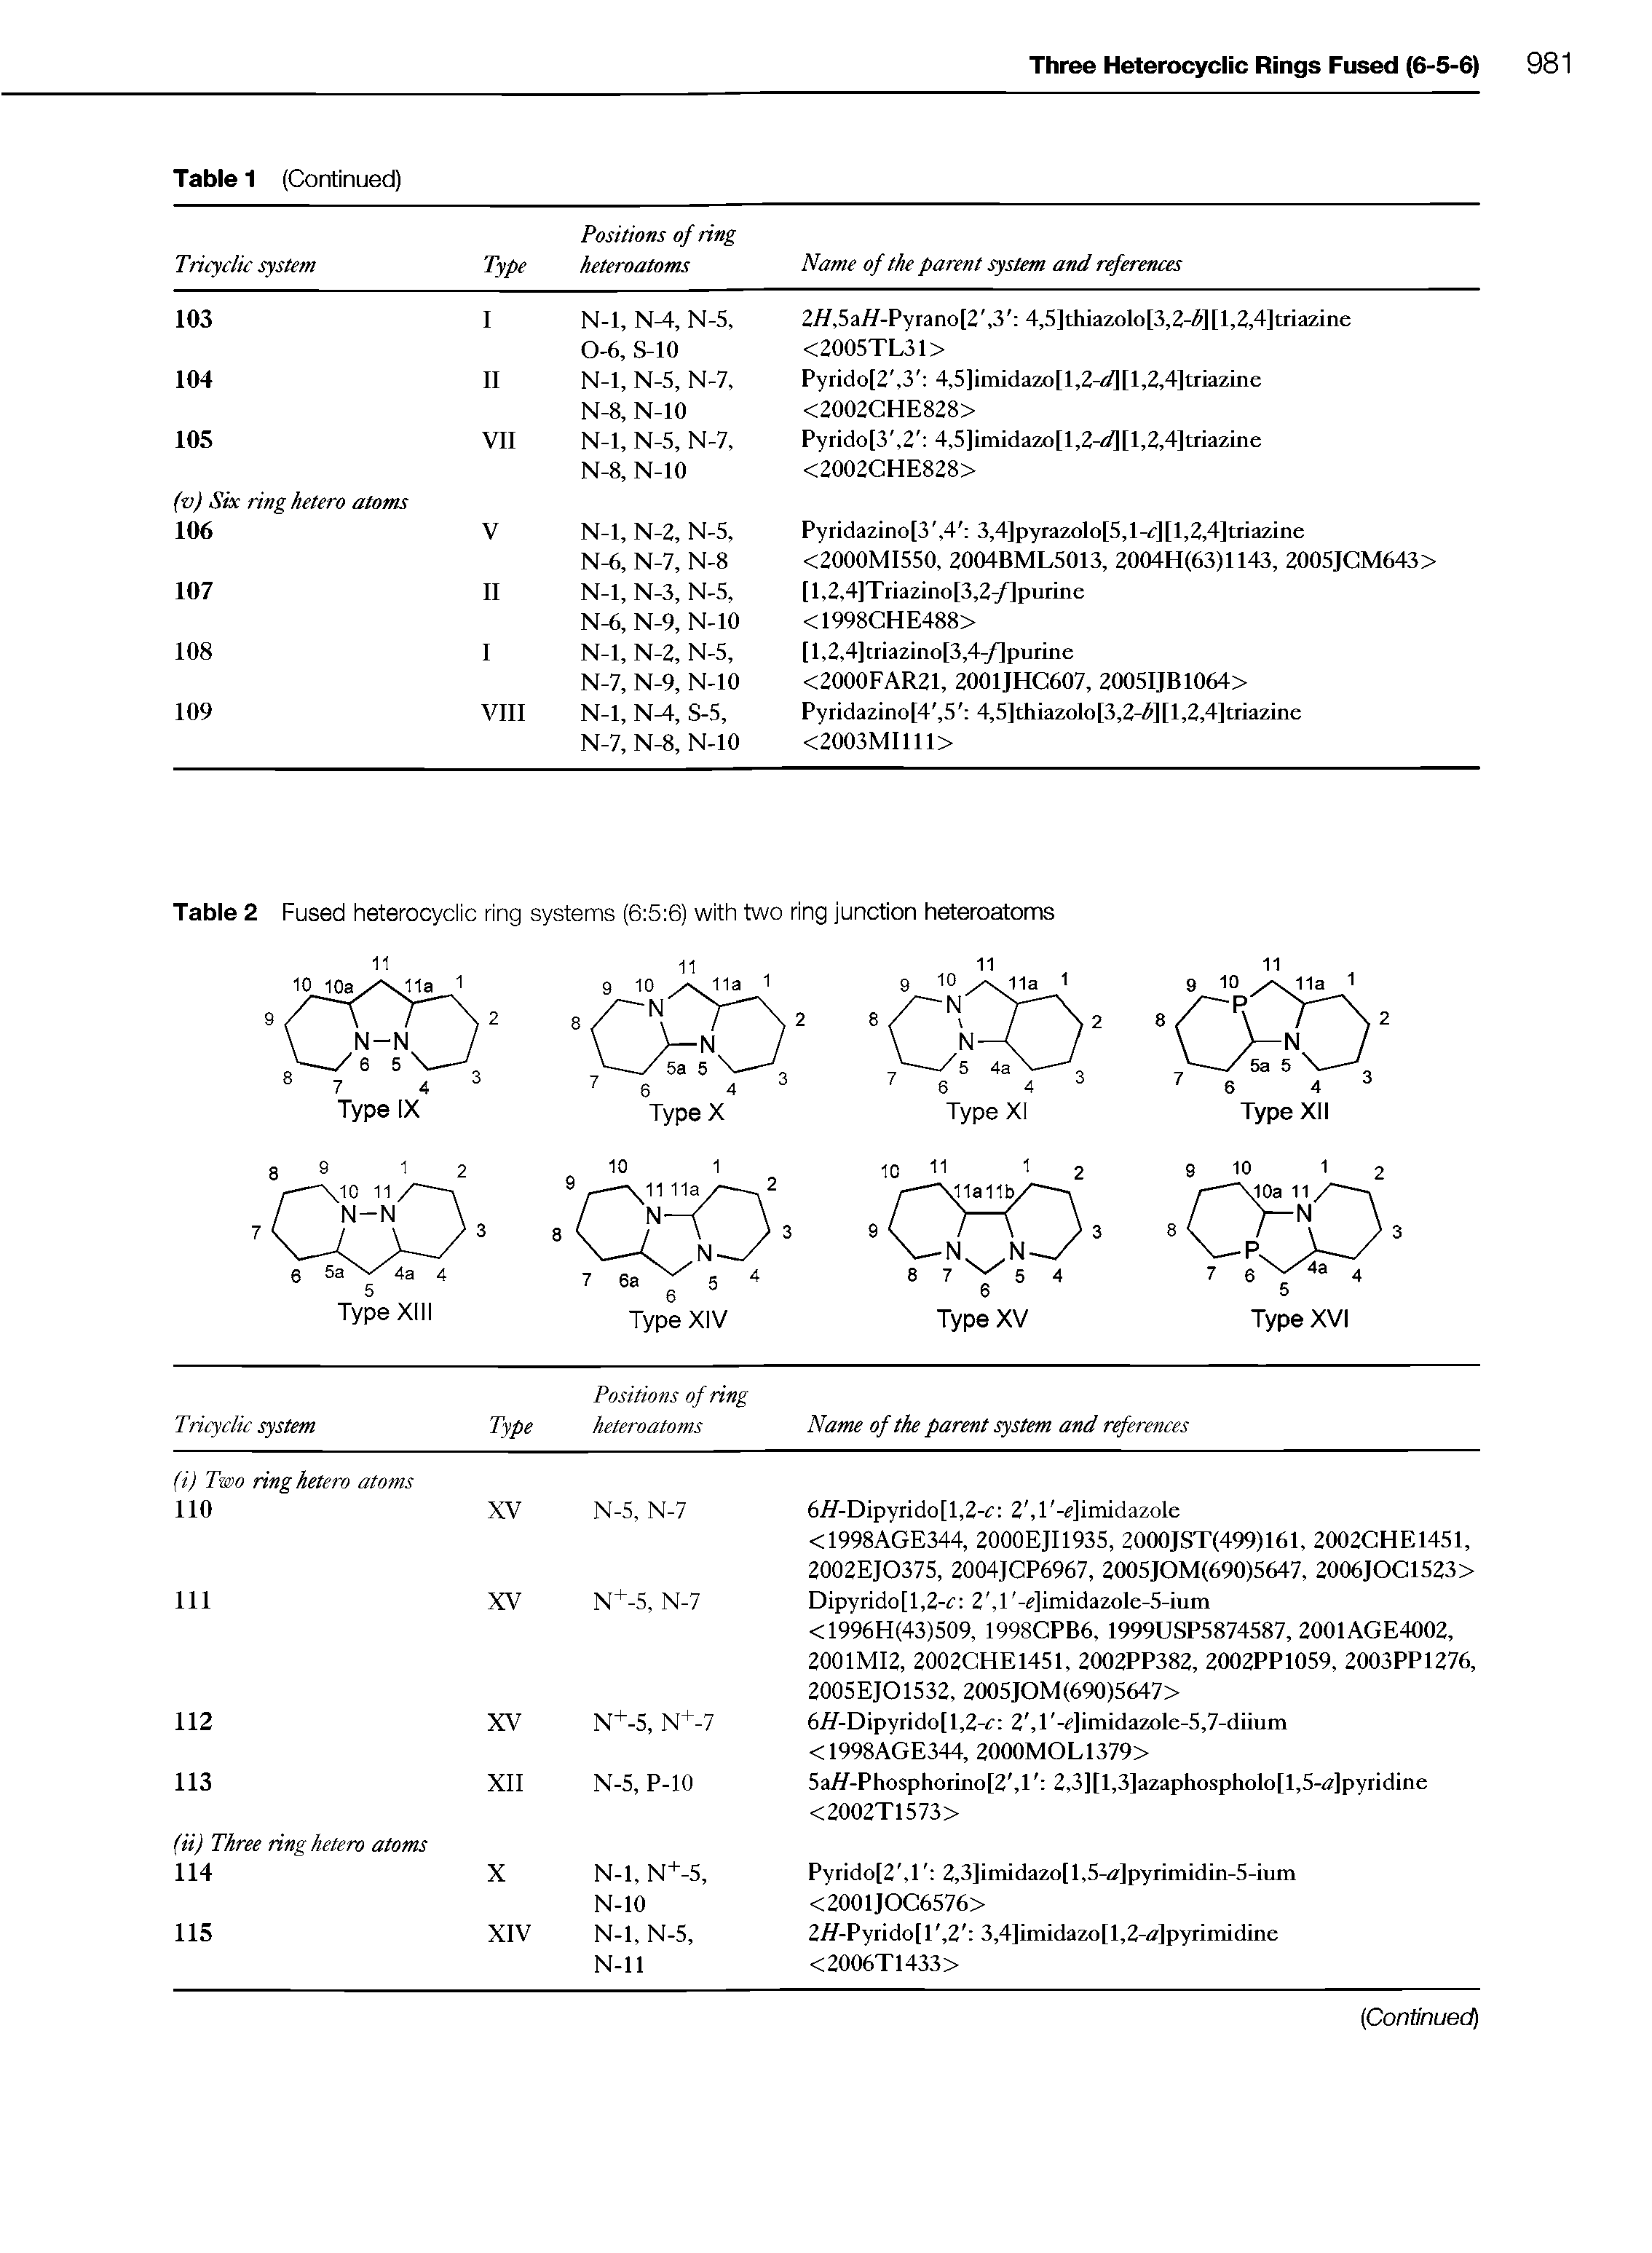 Table 2 Fused heterocyclic ring systems (6 5 6) with two ring junction heteroatoms...